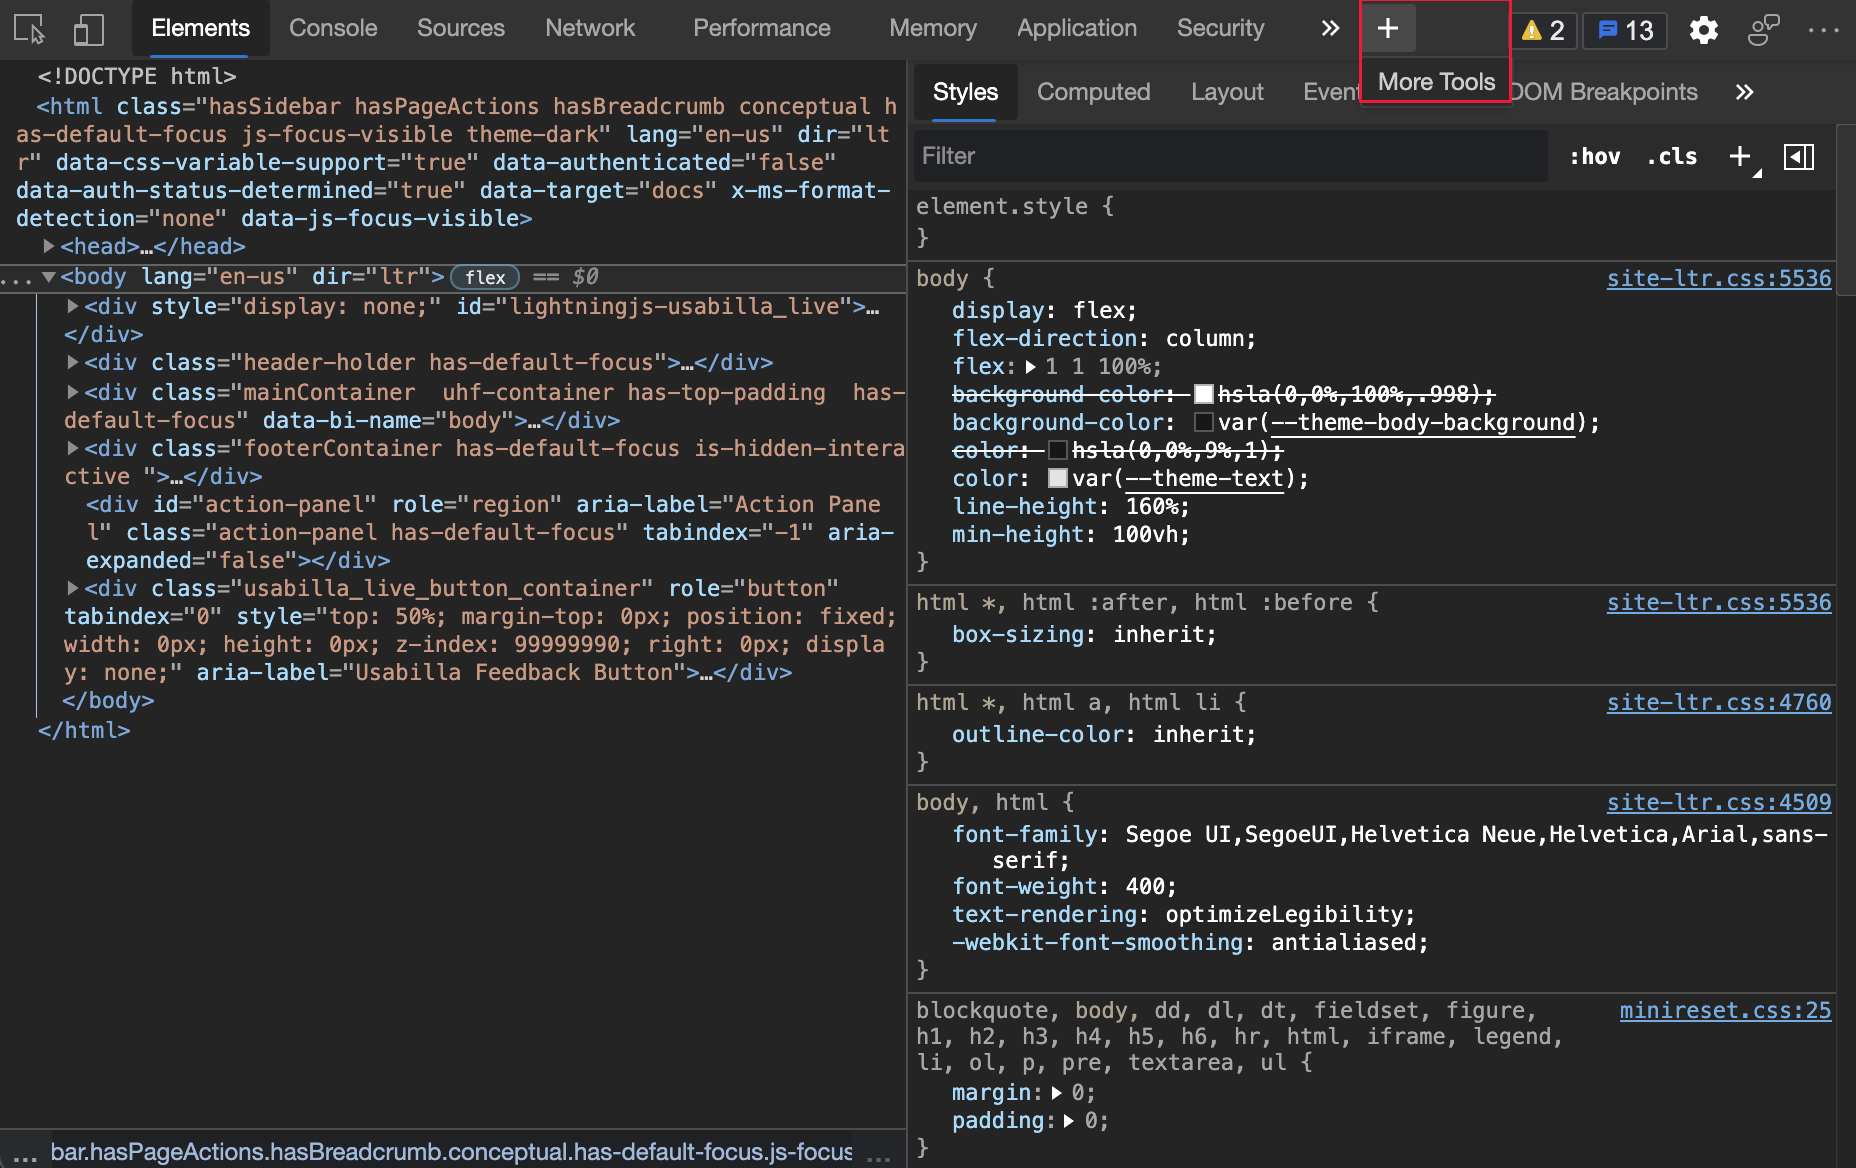 More Tools highlighted in DevTools